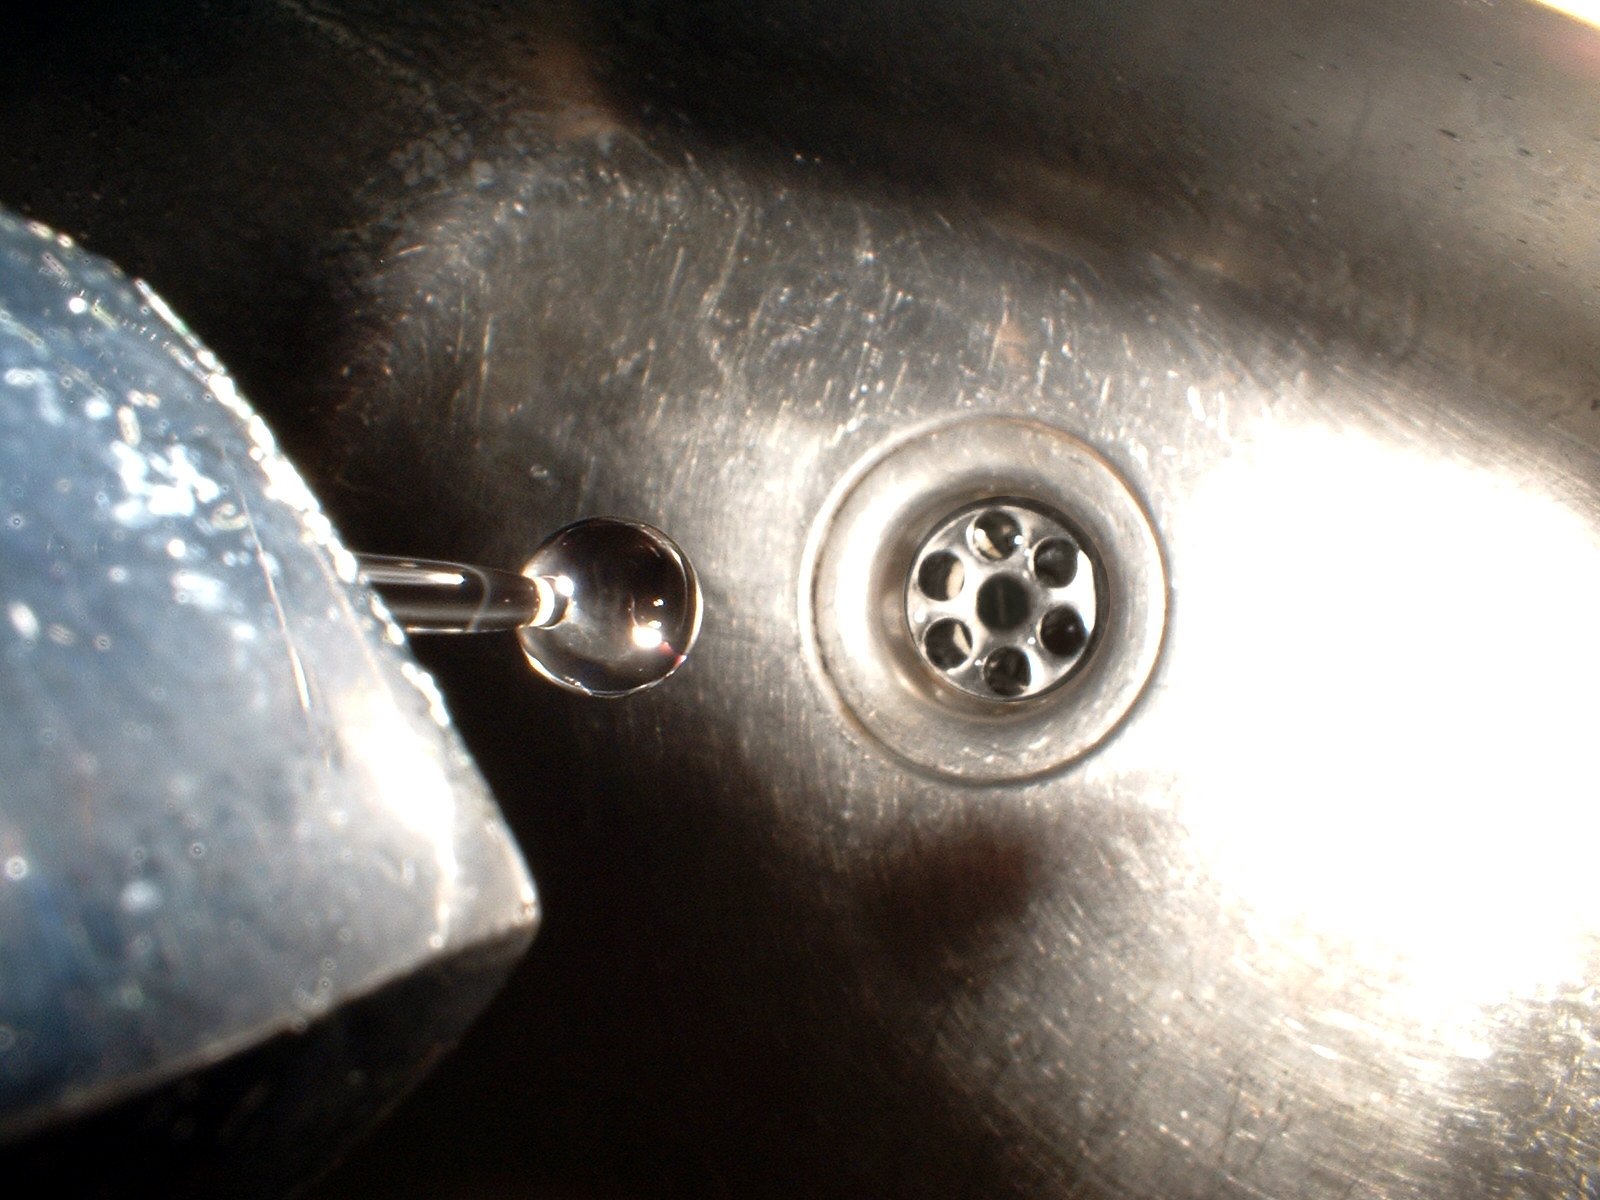 a closeup s of the faucet in this stainless steel sink